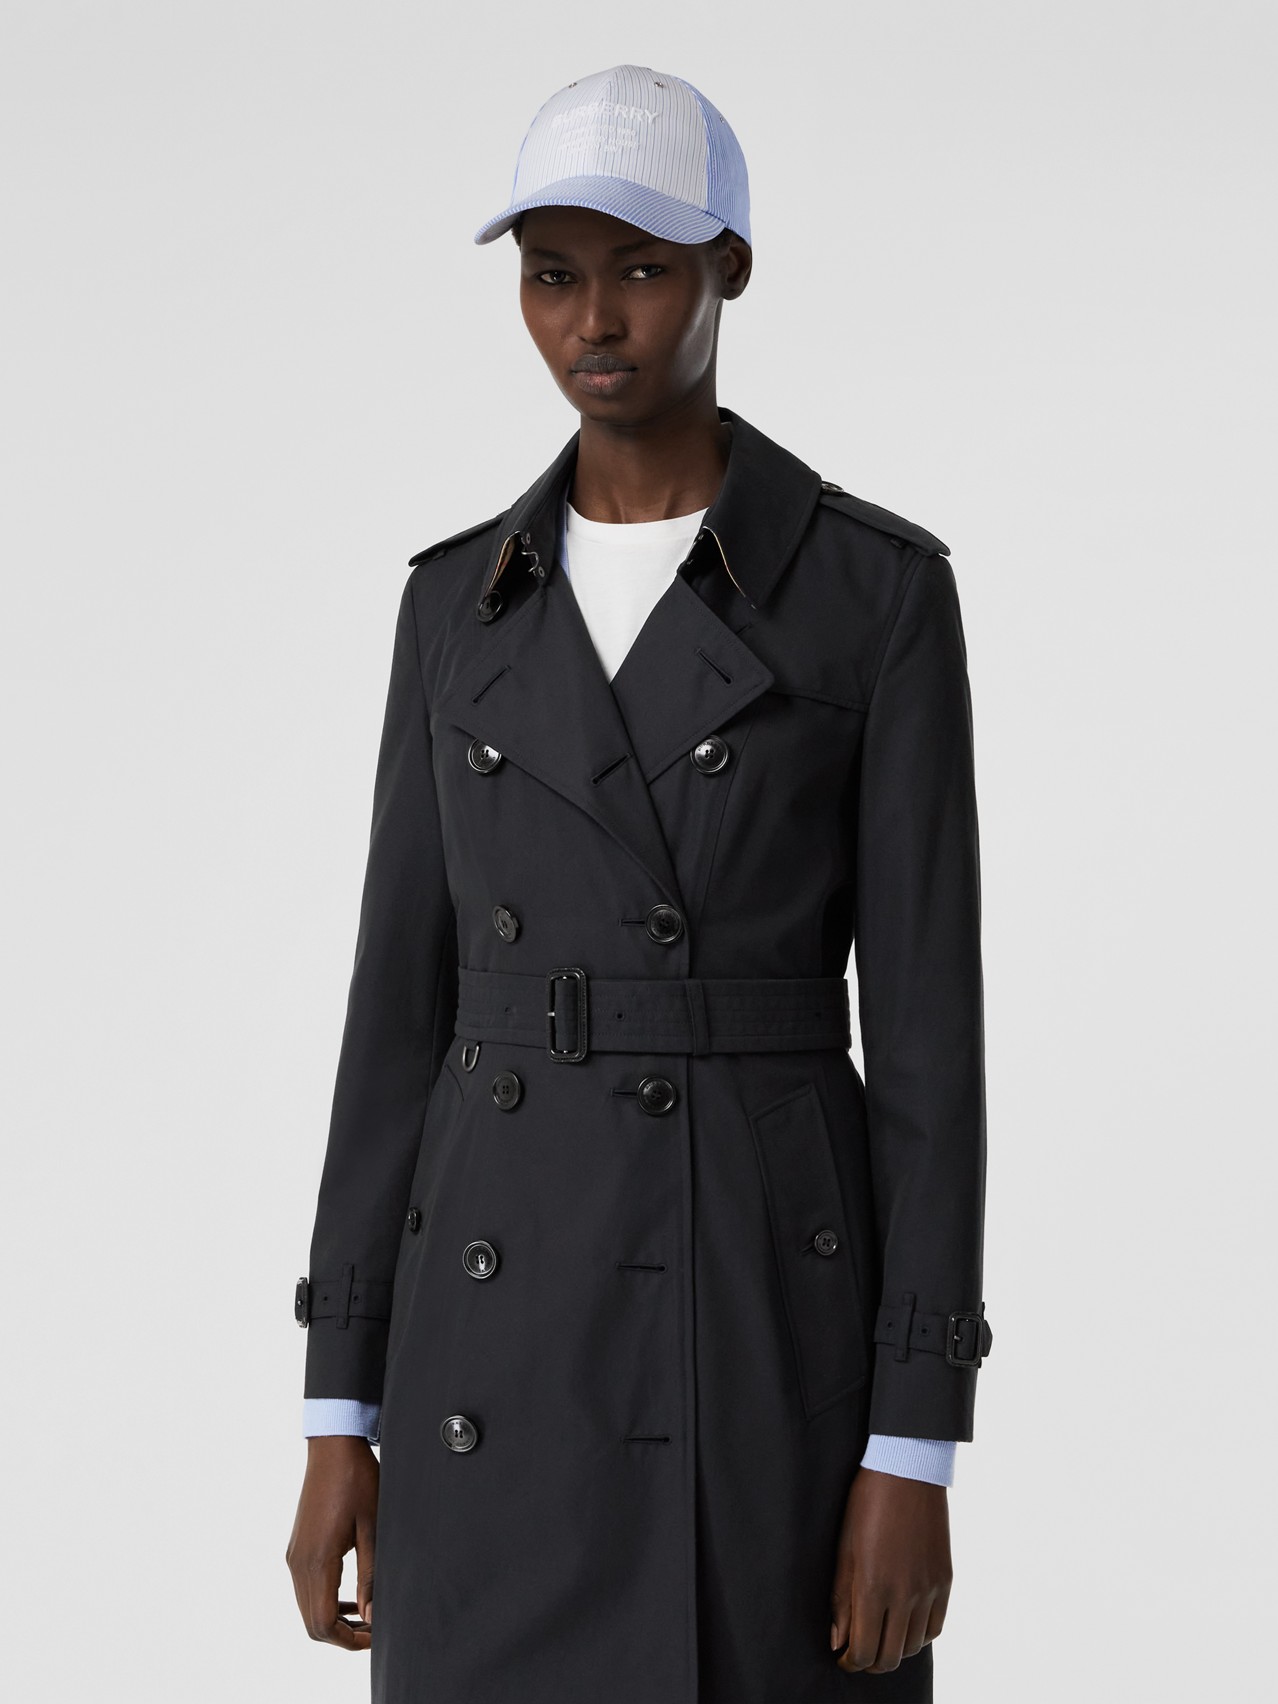 The Mid-length Chelsea Heritage Trench Coat by Burberry, available on burberry.com for $1650 Gigi Hadid Outerwear SIMILAR PRODUCT